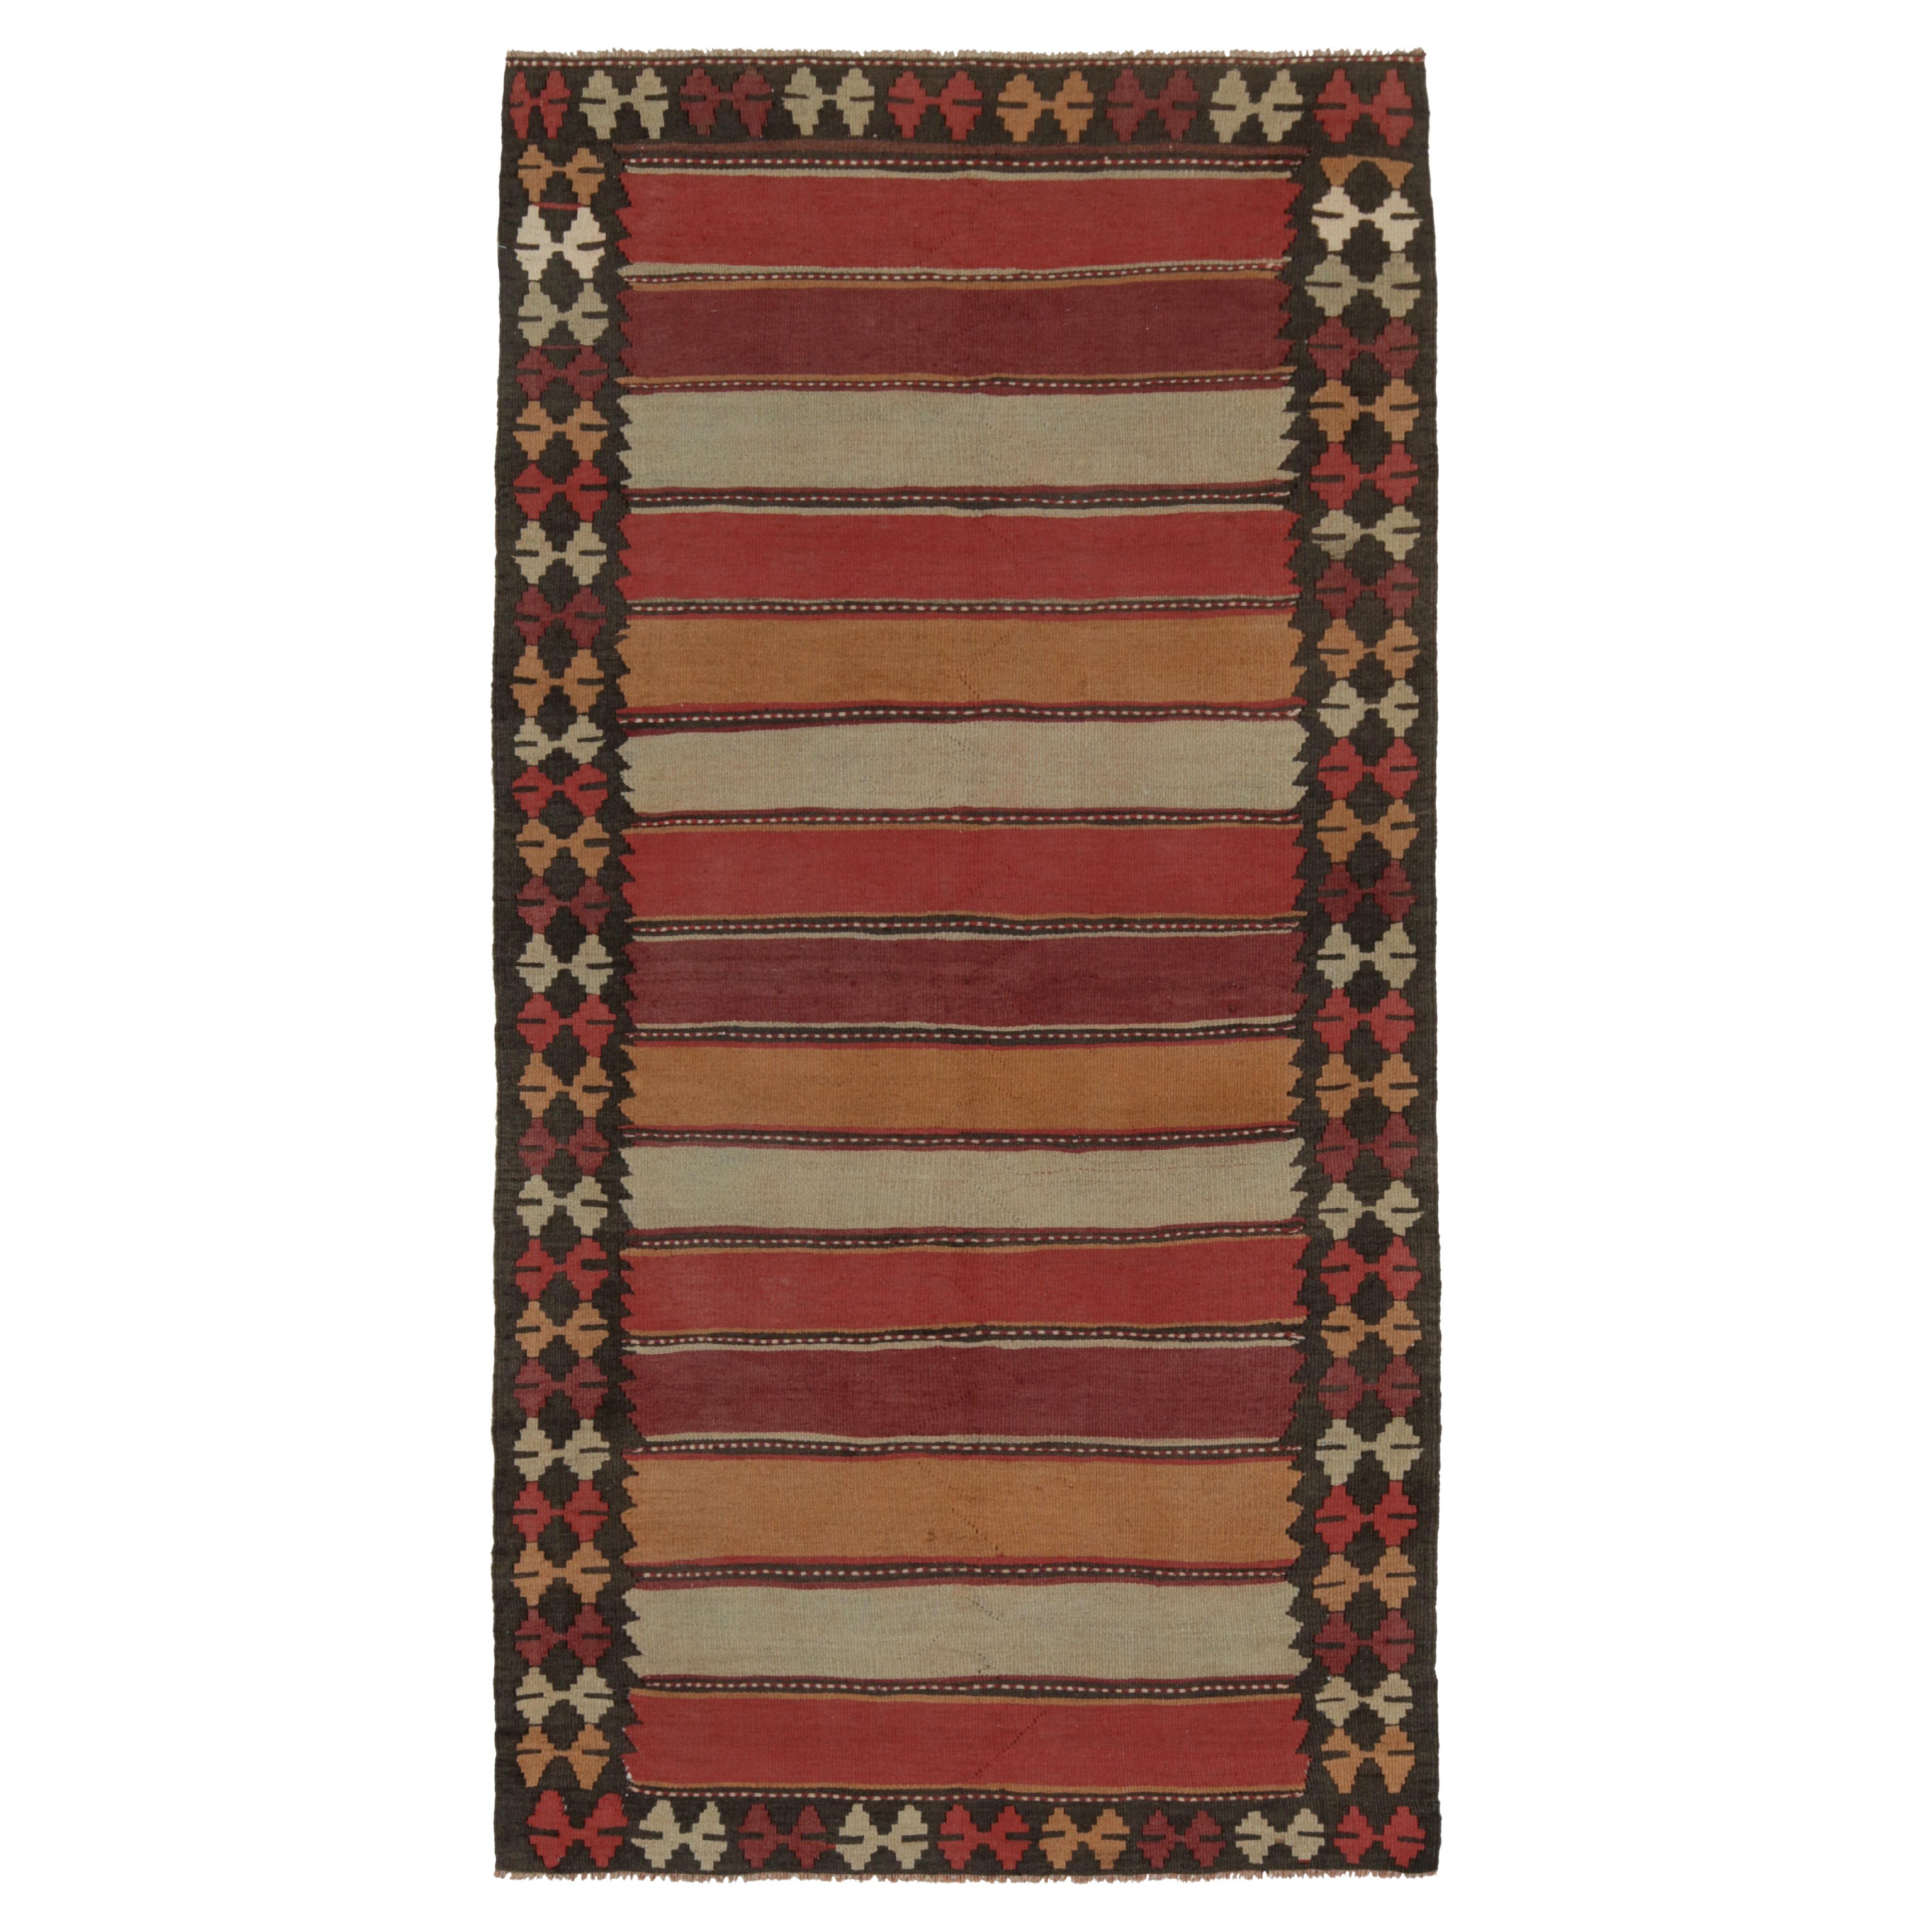 Vintage Persian Tribal Kilim with Stripes and Geometric Patterns by Rug & Kilim For Sale